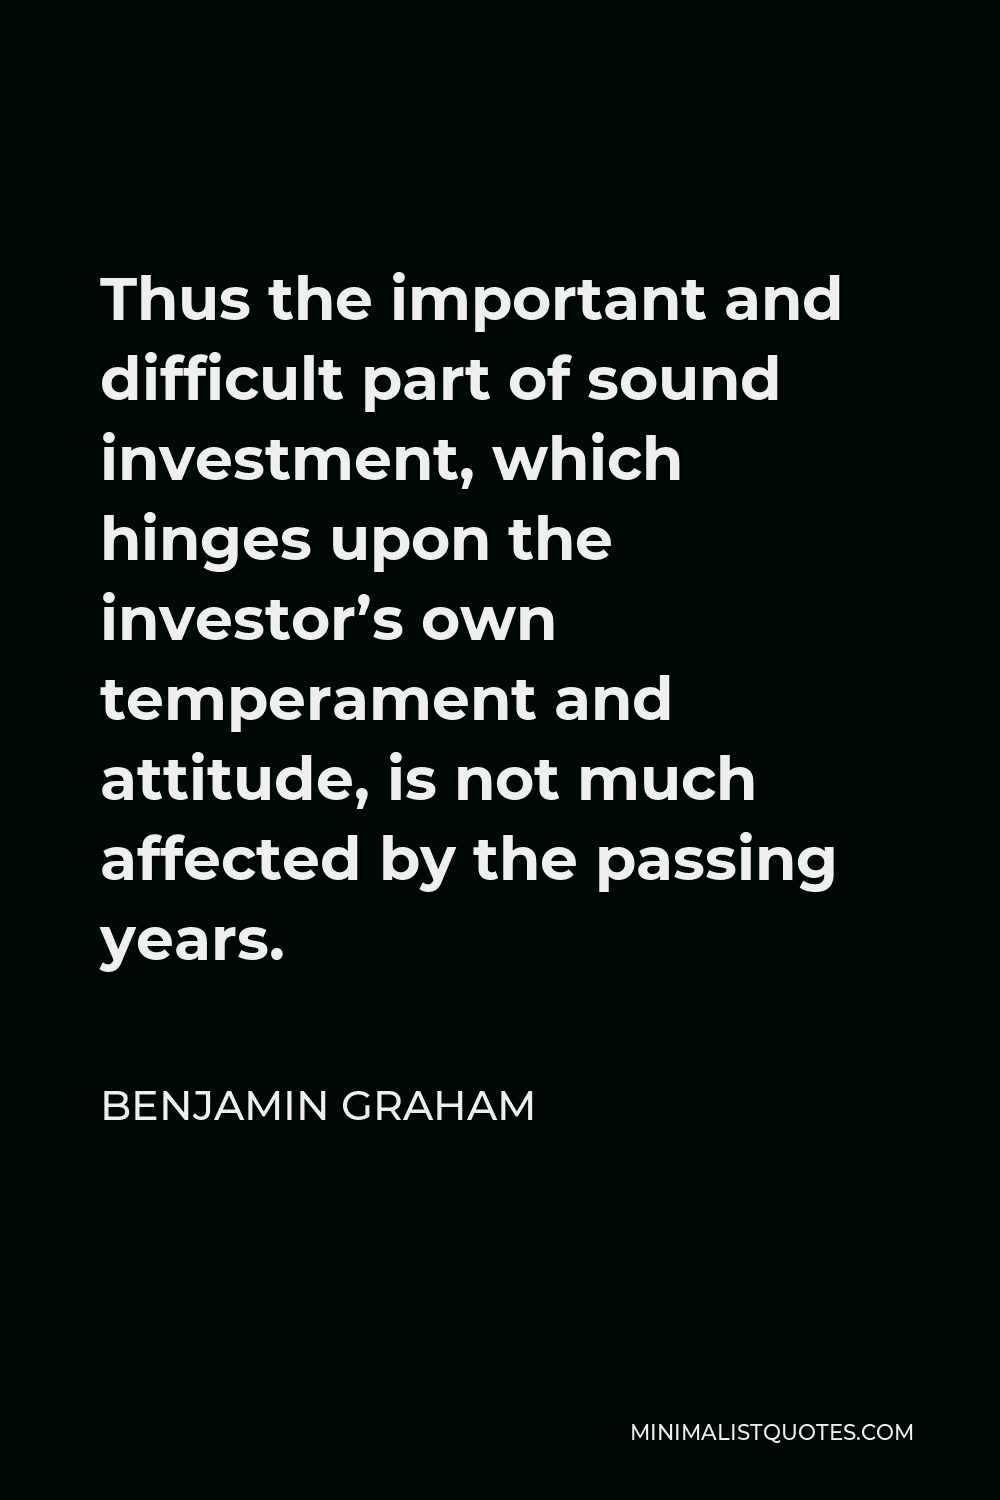 Benjamin Graham Quote - Thus the important and difficult part of sound investment, which hinges upon the investor’s own temperament and attitude, is not much affected by the passing years.